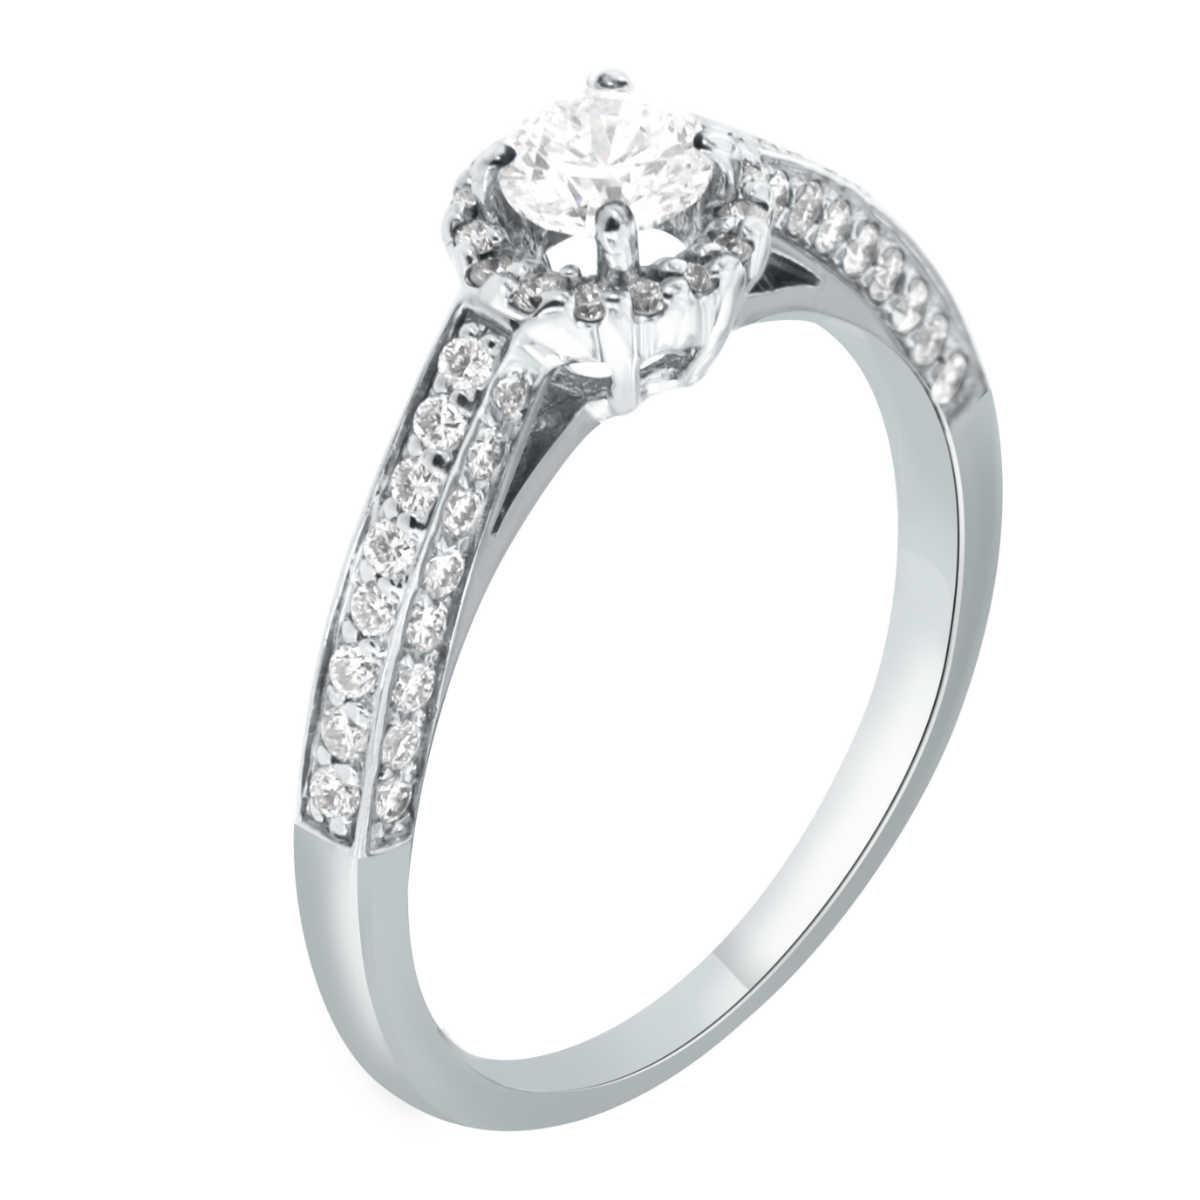 This 18K White Gold handcrafted Women's engagement ring showcases a Round Brilliant Cut diamond accompanied by a melee of Round Brilliant Cut diamonds in a halo setting.

Center Diamond Weight : 0.40 Carats
Side Diamond Weight: 0.38 Carats
Diamond